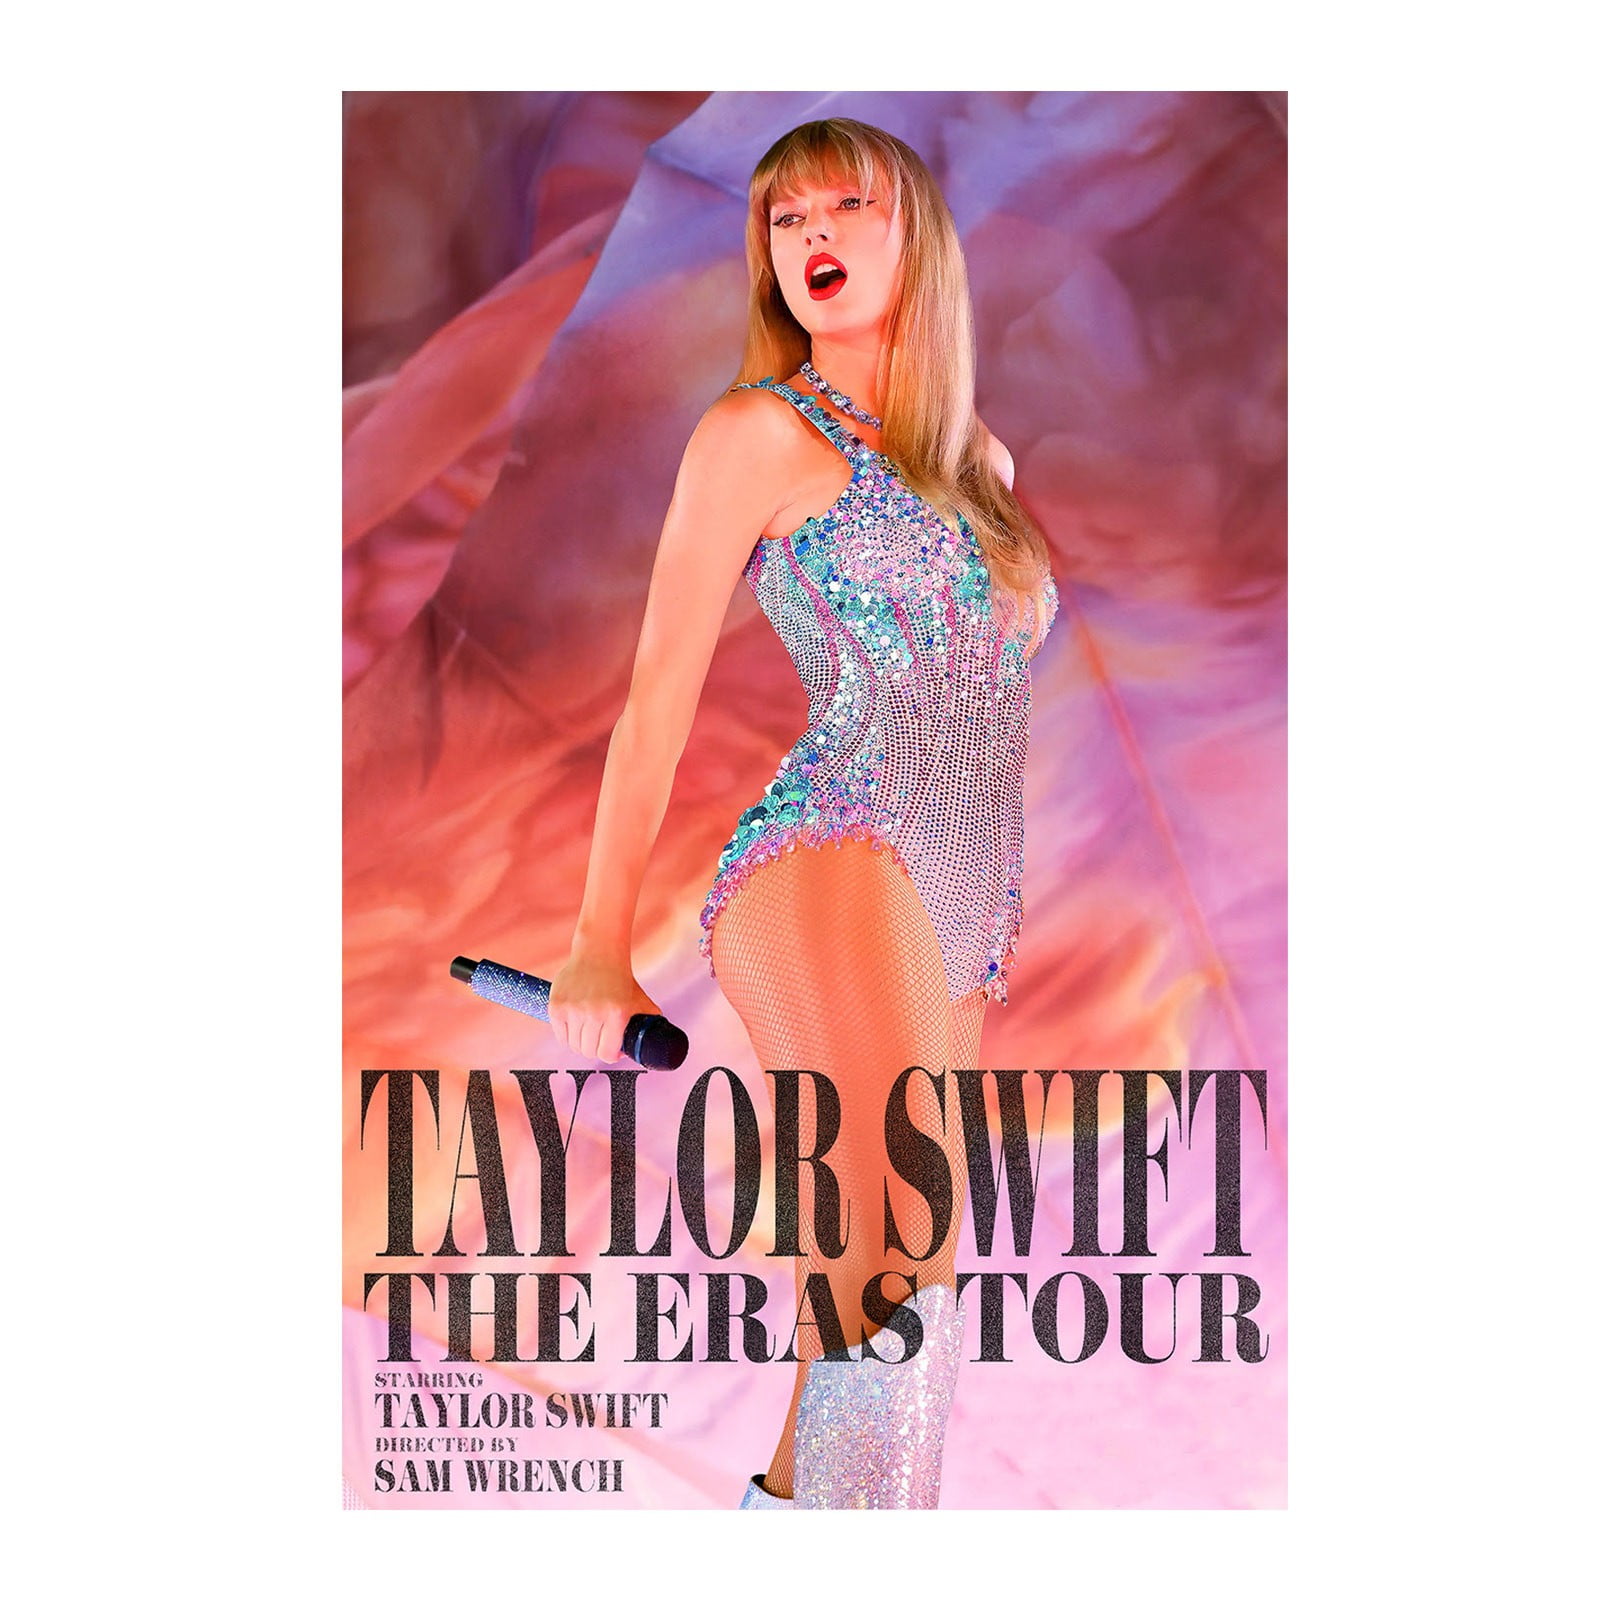 Taylor Music Swift Album Poster The Cover Signed Limited Poster Canvas Wall  Art Room Aesthetics for Girl and Boy Teens Dorm Decor - Unframed 